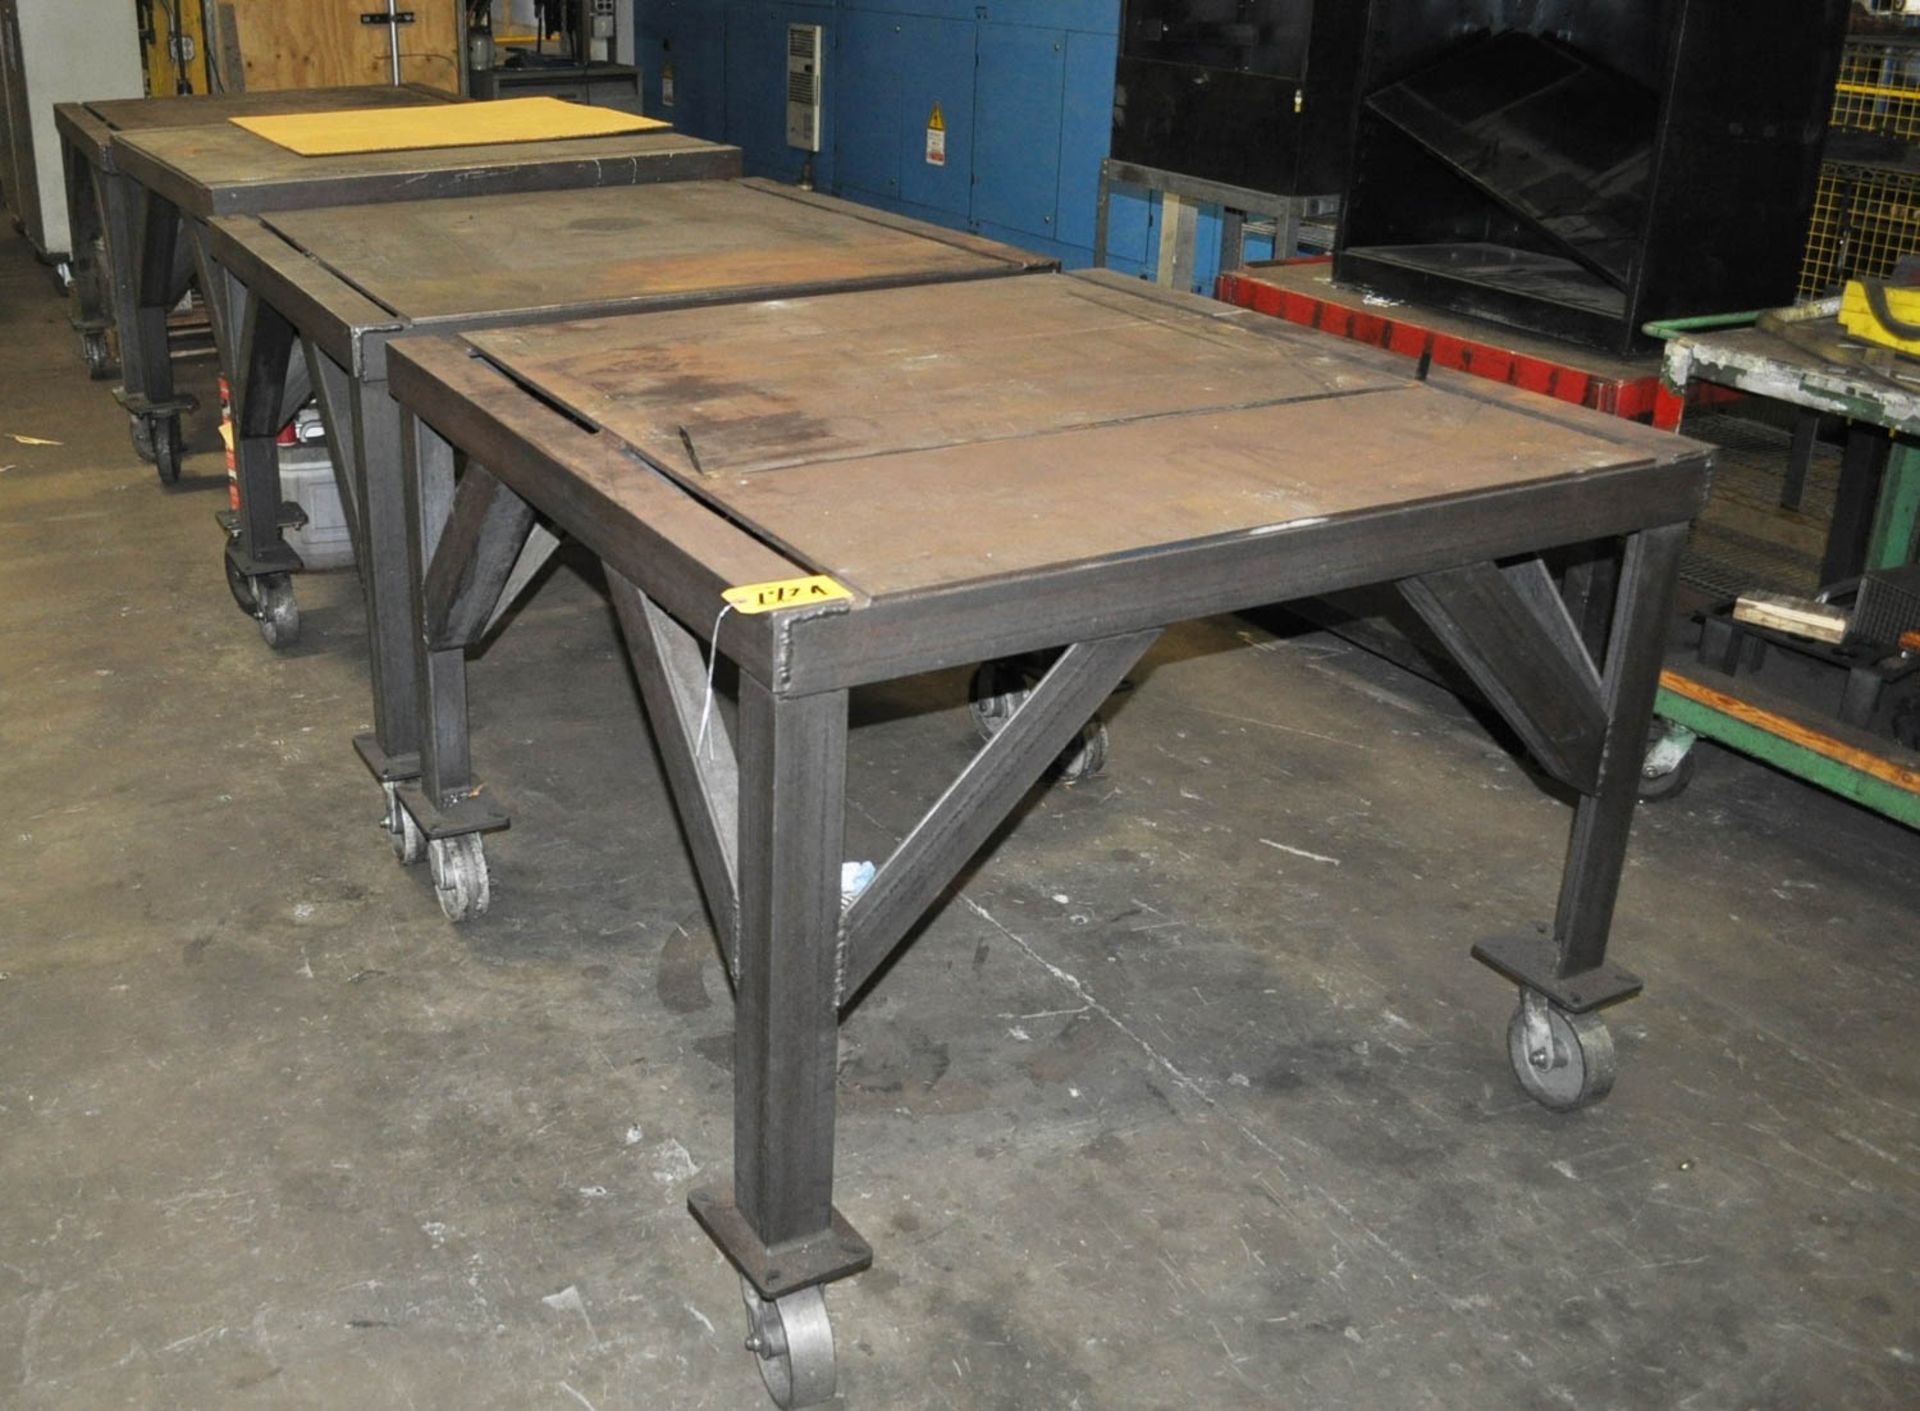 [6] 4' X 4' PORTABLE STEEL PALLET TABLES